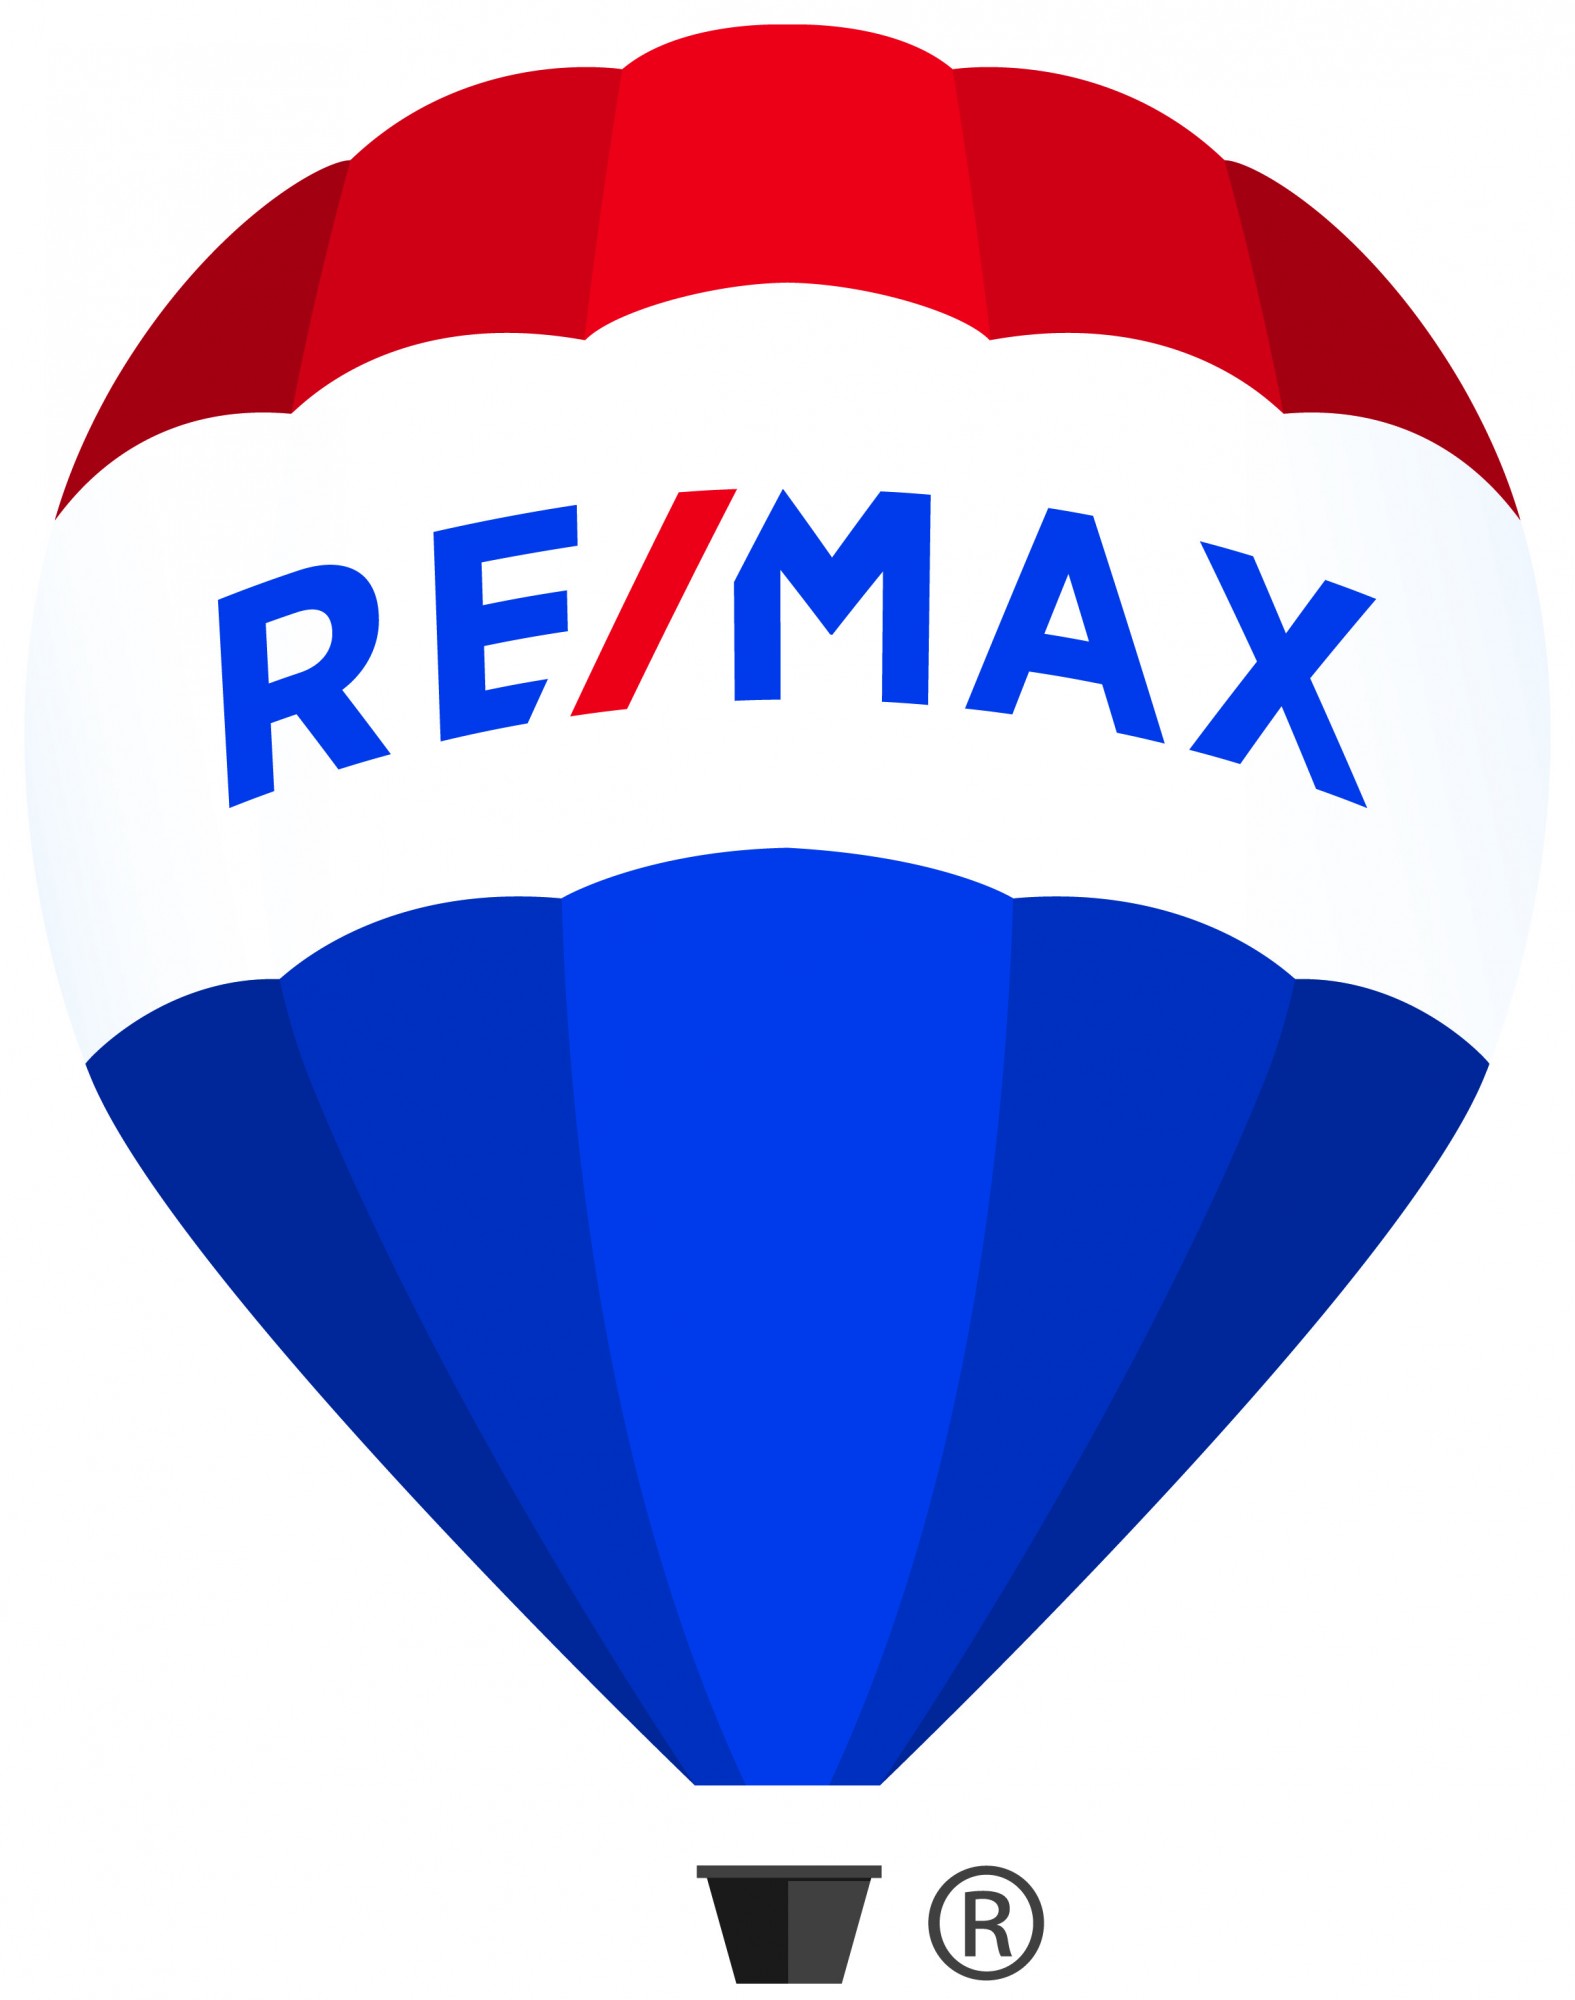 REMAX  First Realty